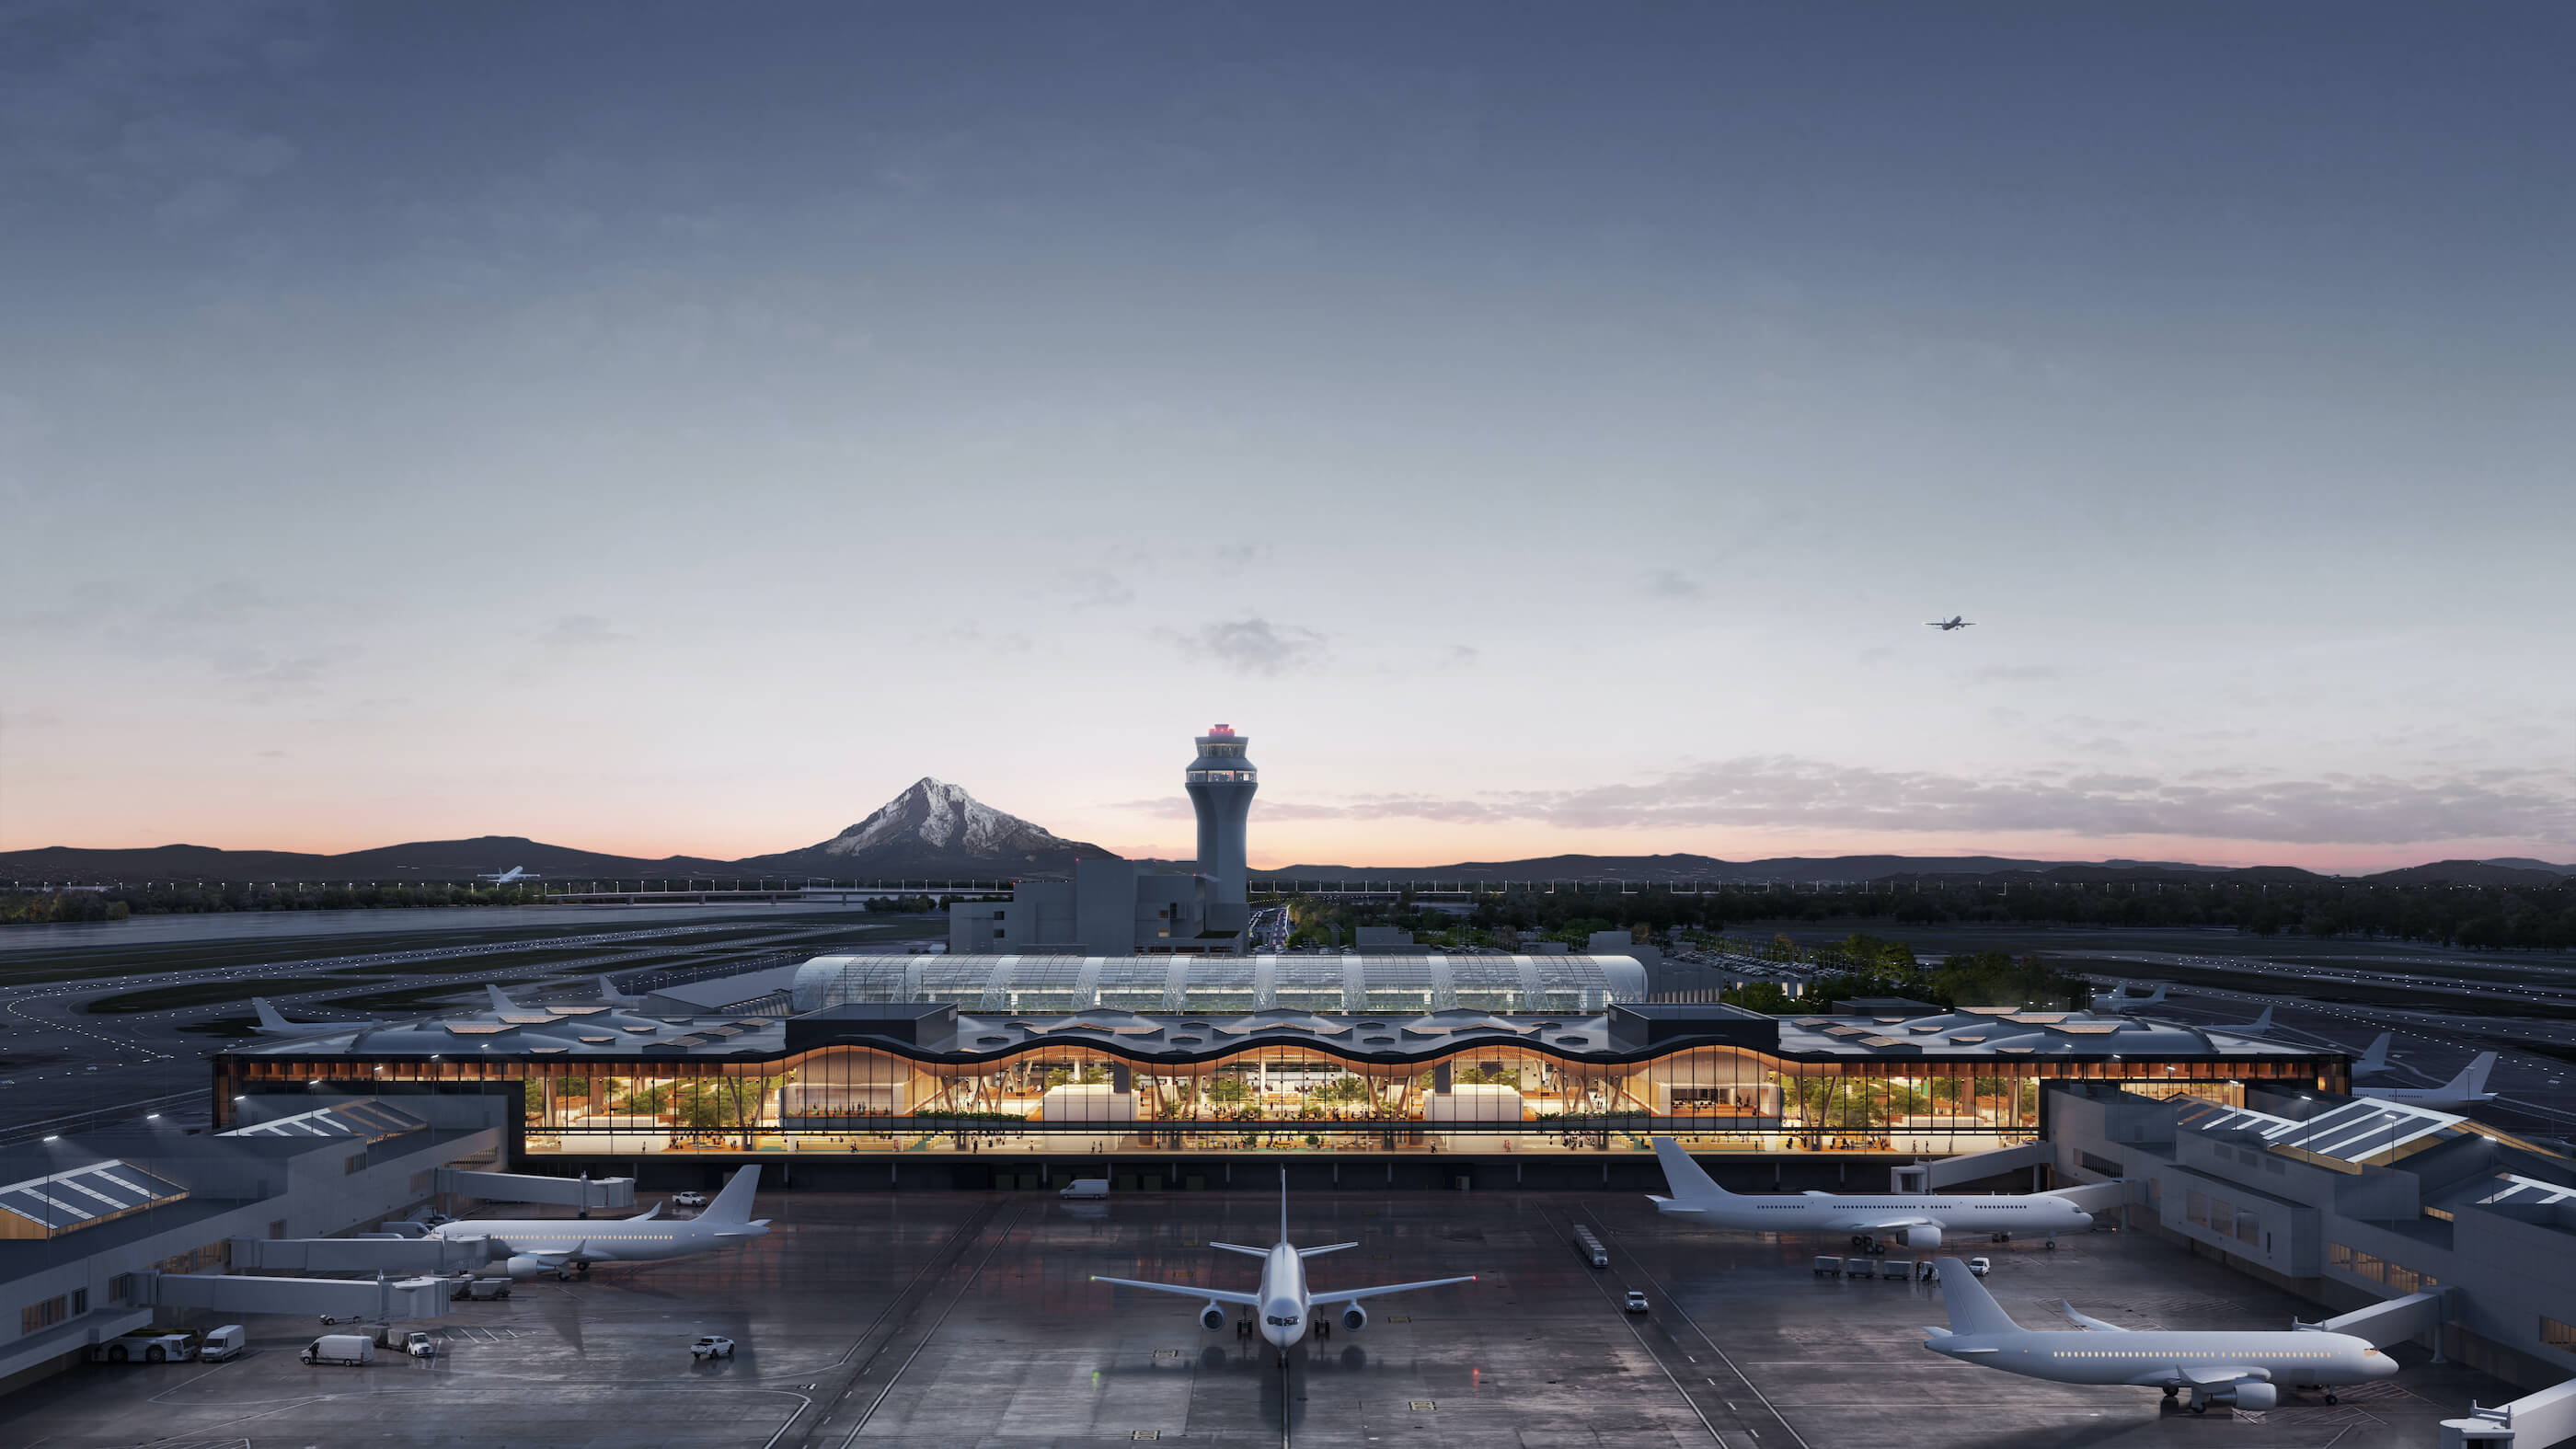 bird's eye rendering of an airport terminal at dusk with a mountain in the background